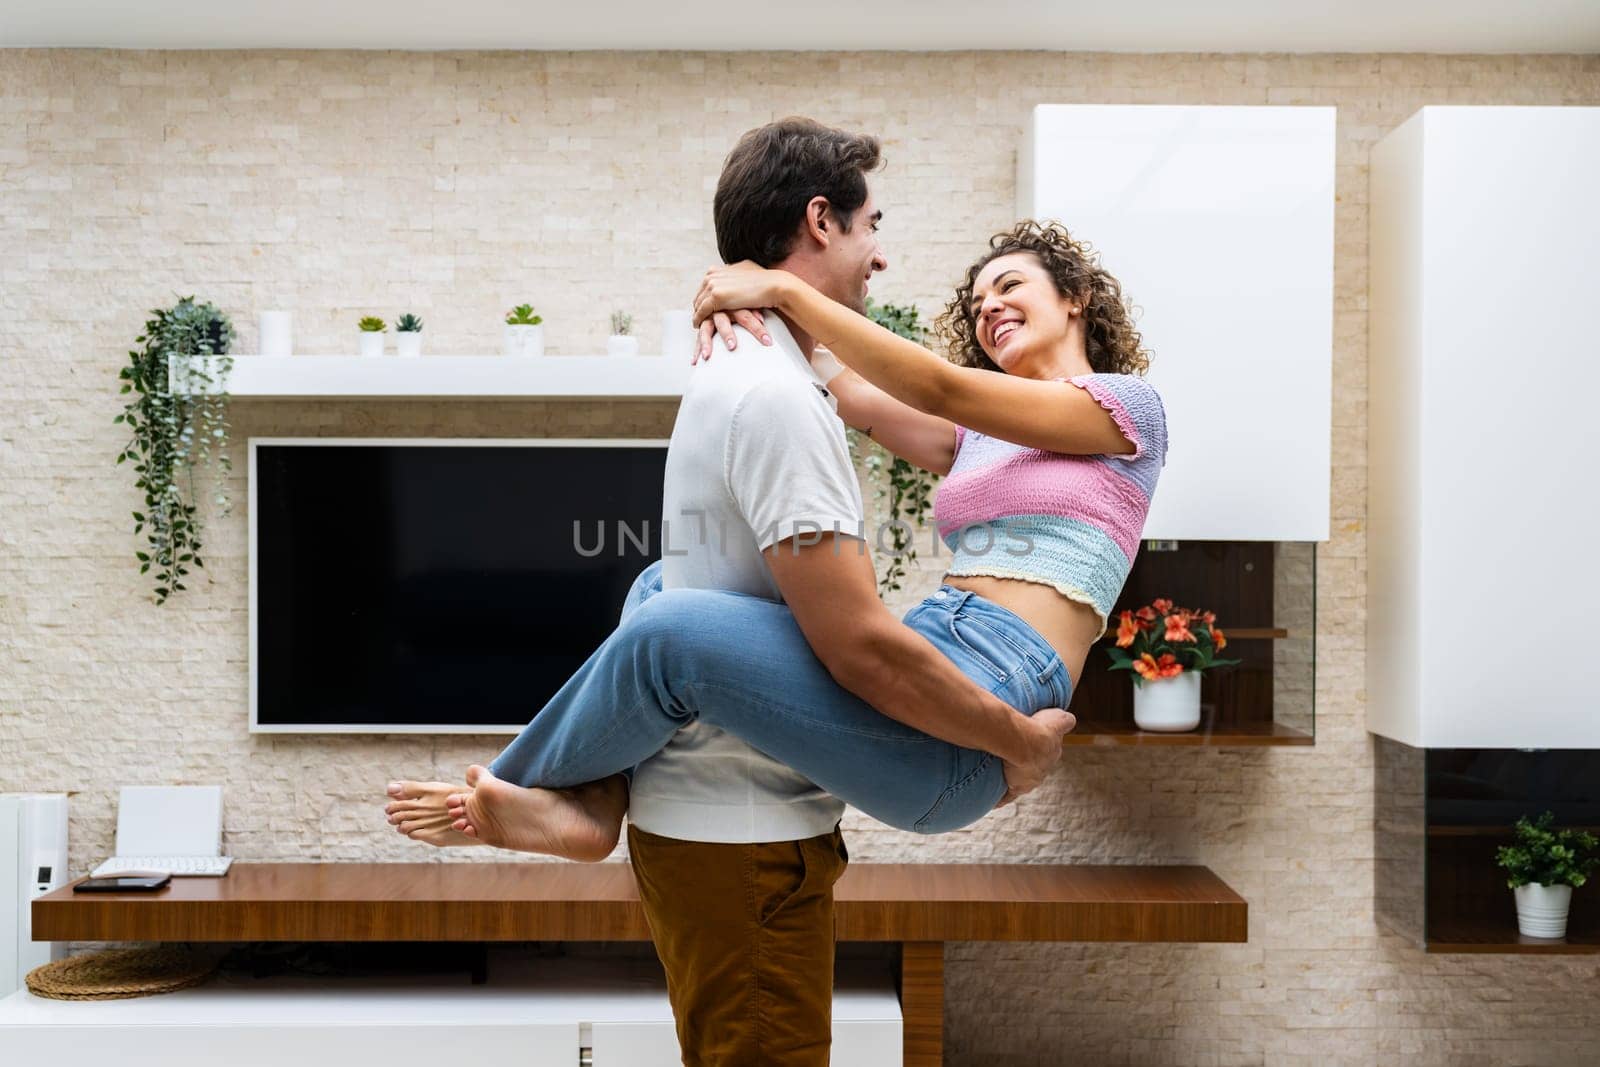 Smiling young couple embracing at home near TV on wall by javiindy